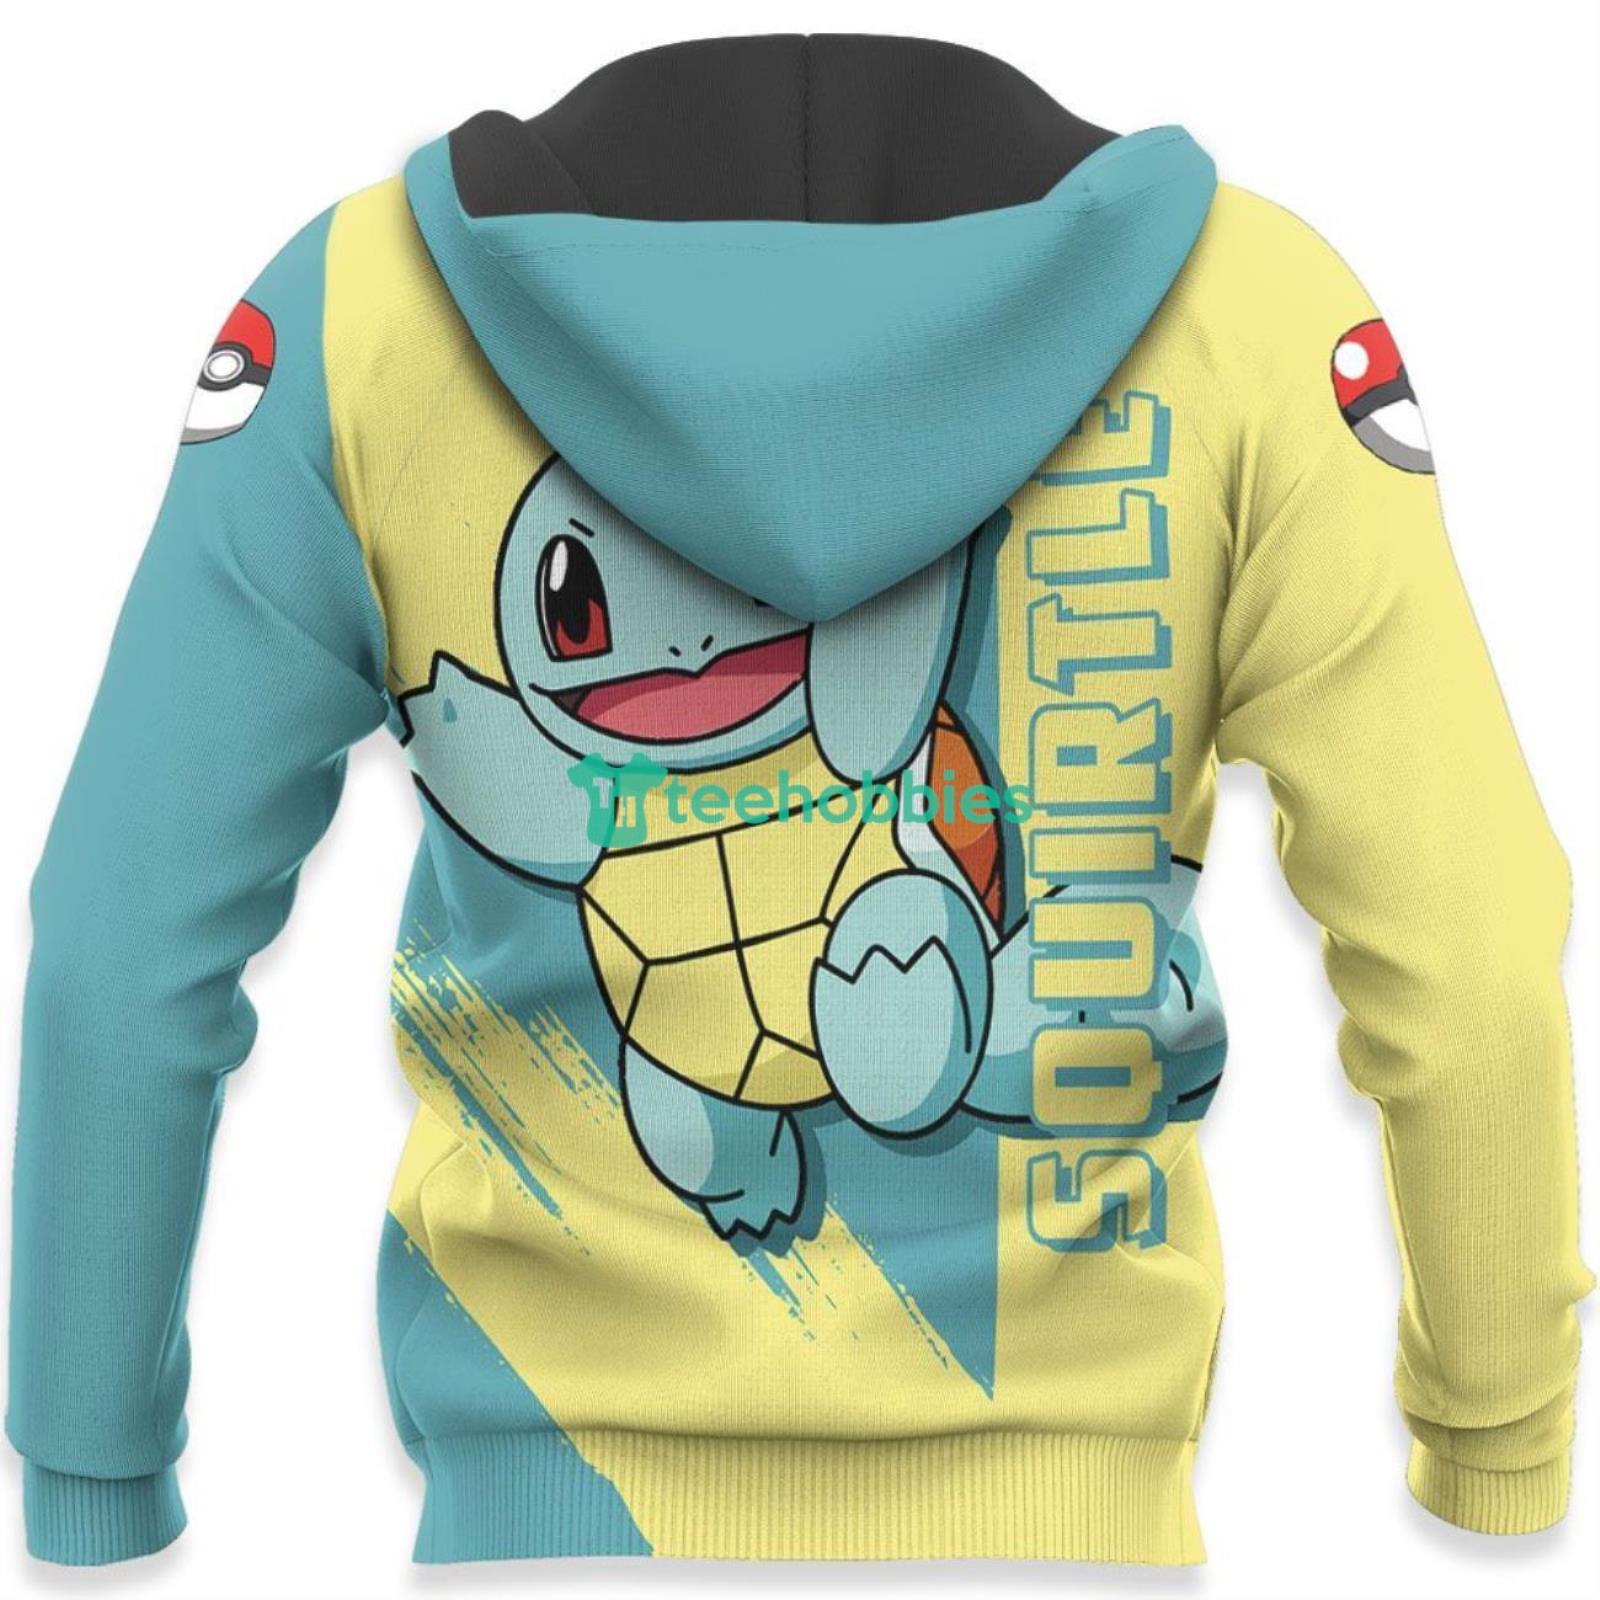 Pokemon Squirtle Lover All Over Printed 3D Shirt Anime Fans Product Photo 5 Product photo 2